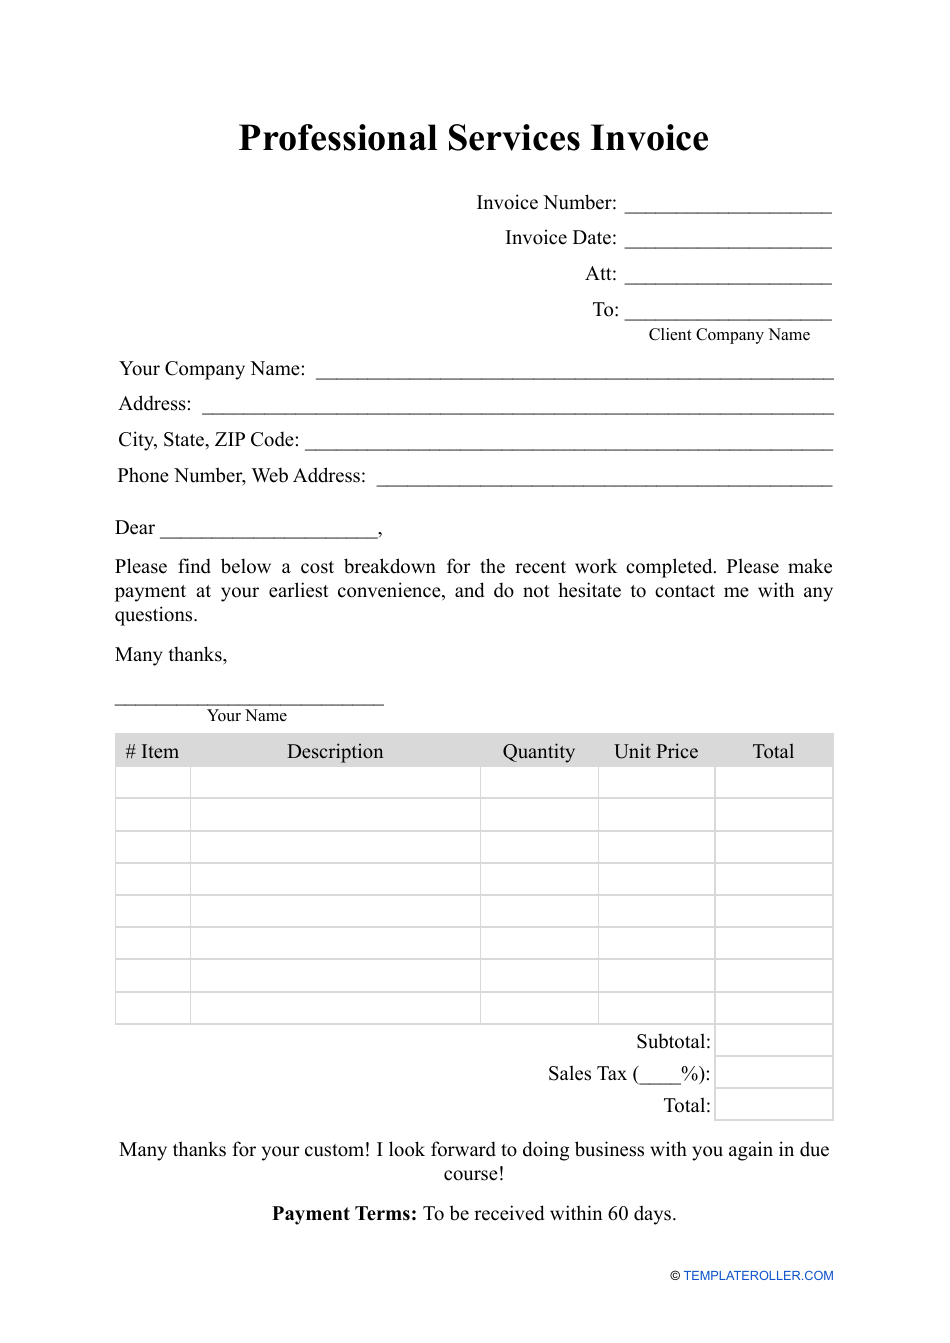 microsoft word professional services invoice templates